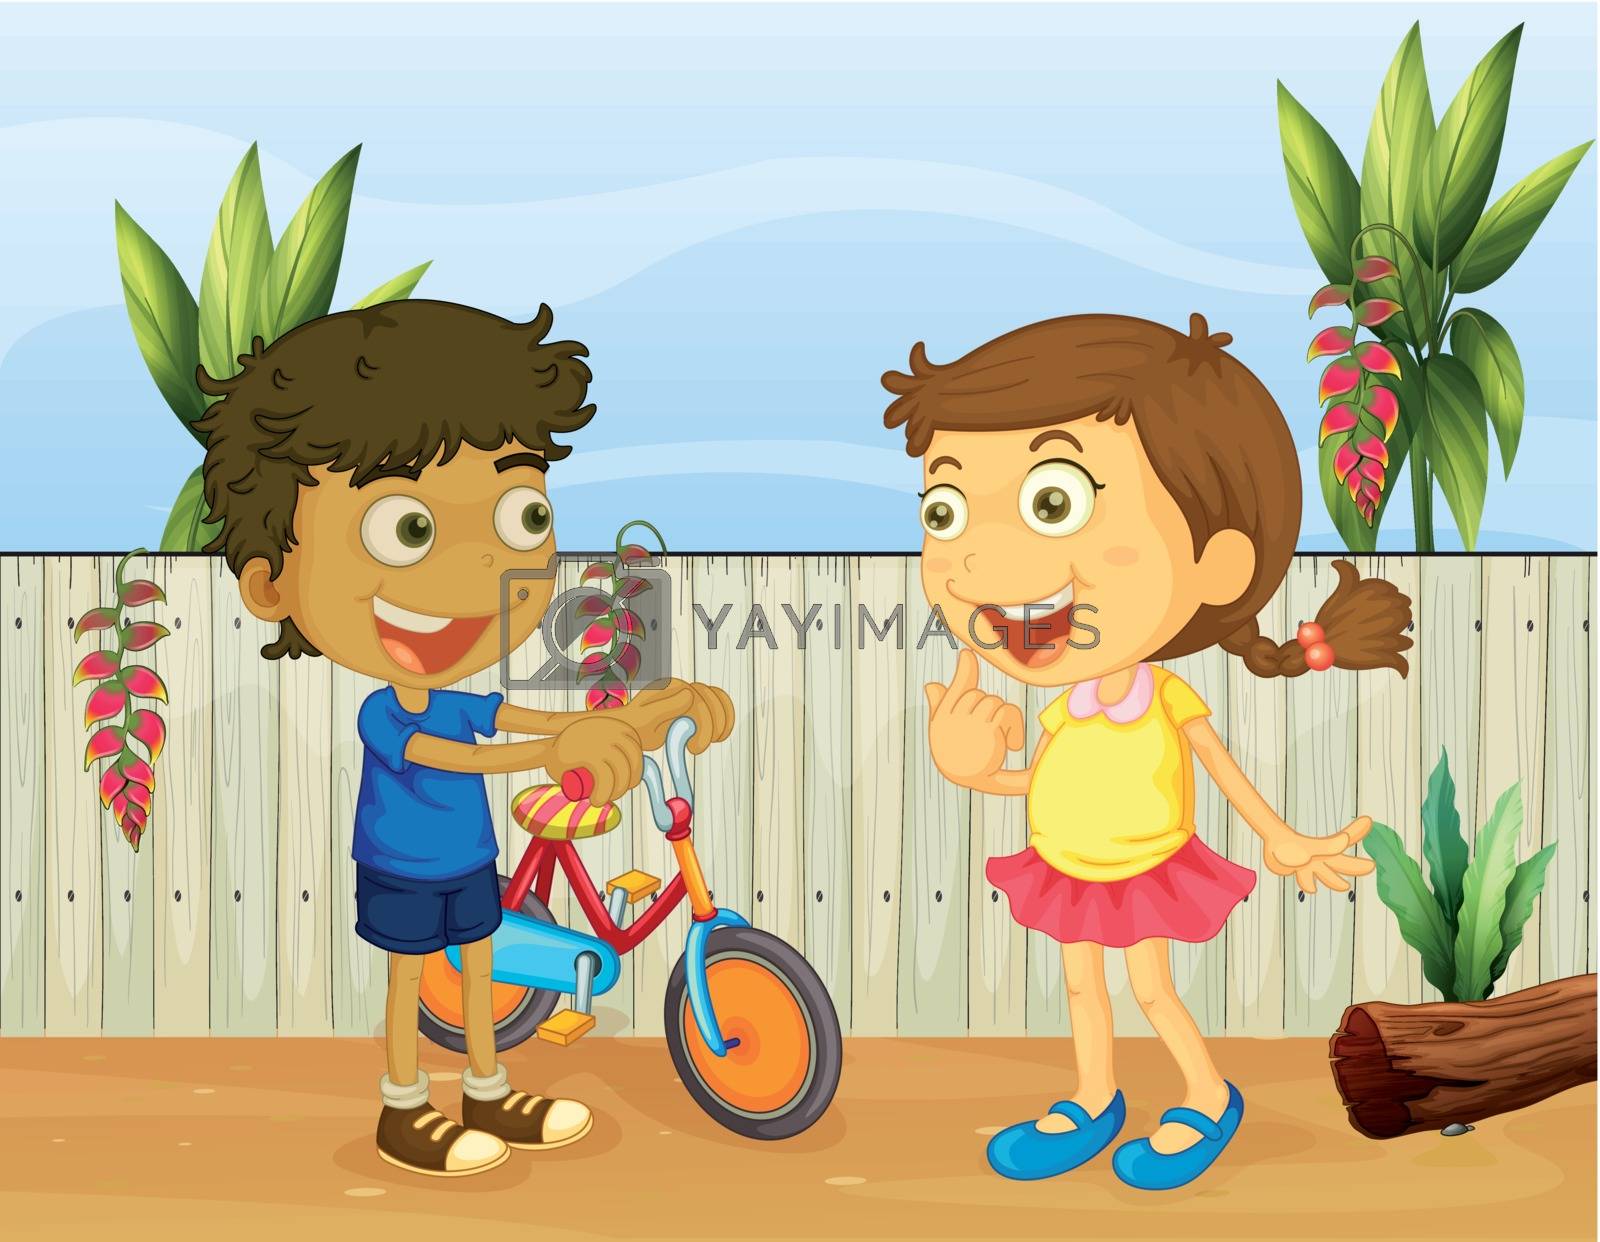 Royalty free image of Two children talking by iimages